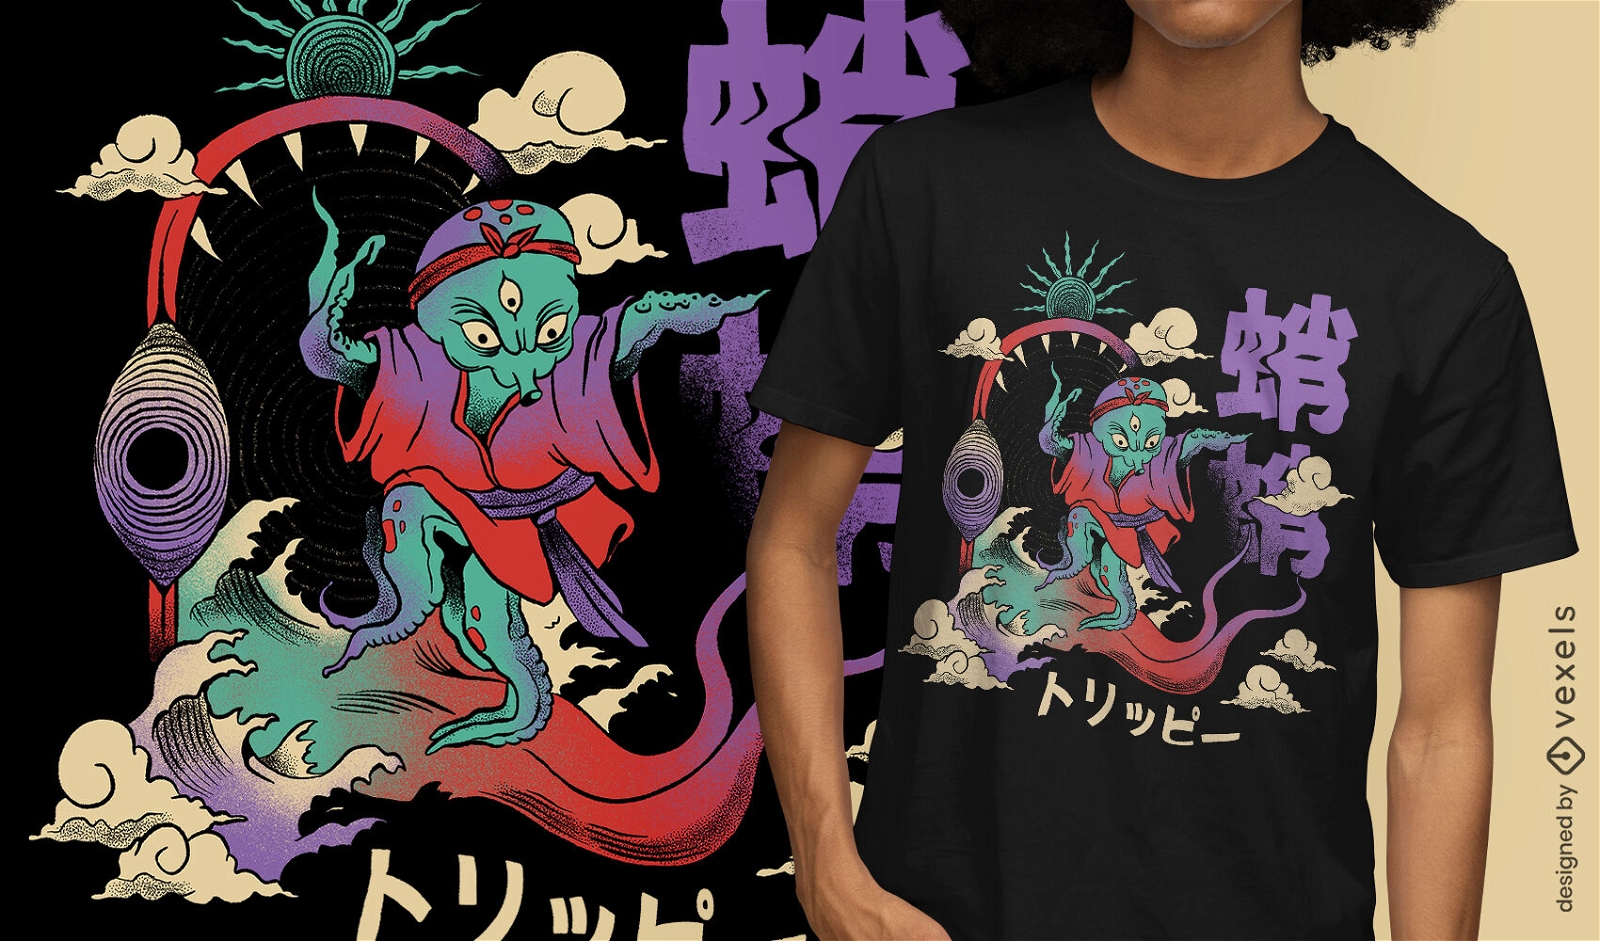 Octopus in japanese psychedelic t-shirt design